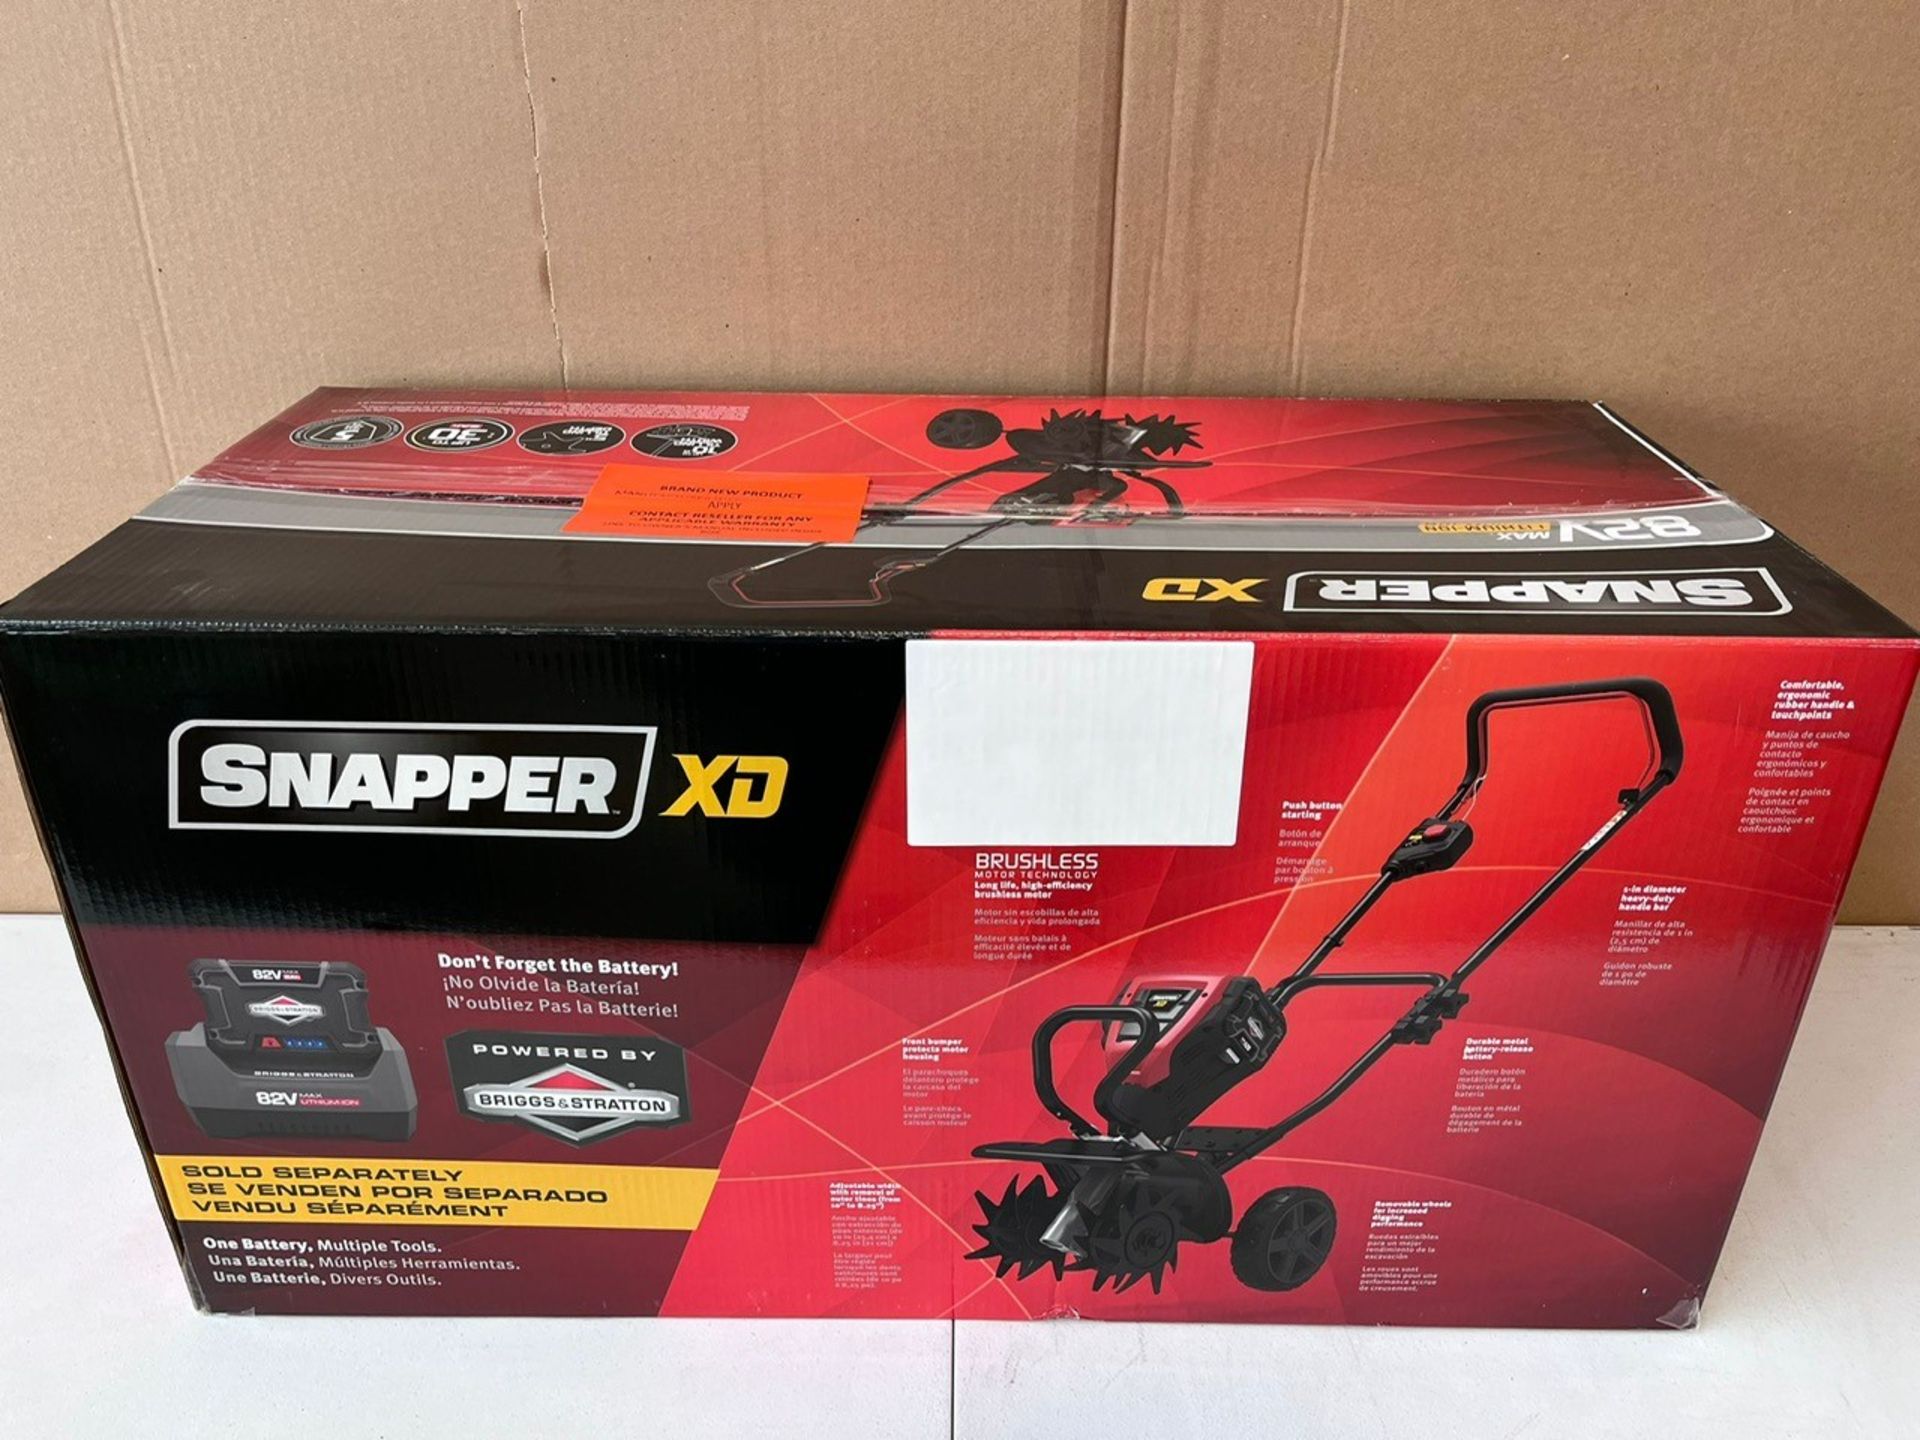 Snapper - Xd 82V Cultivator - Battery Not Included - Image 2 of 3